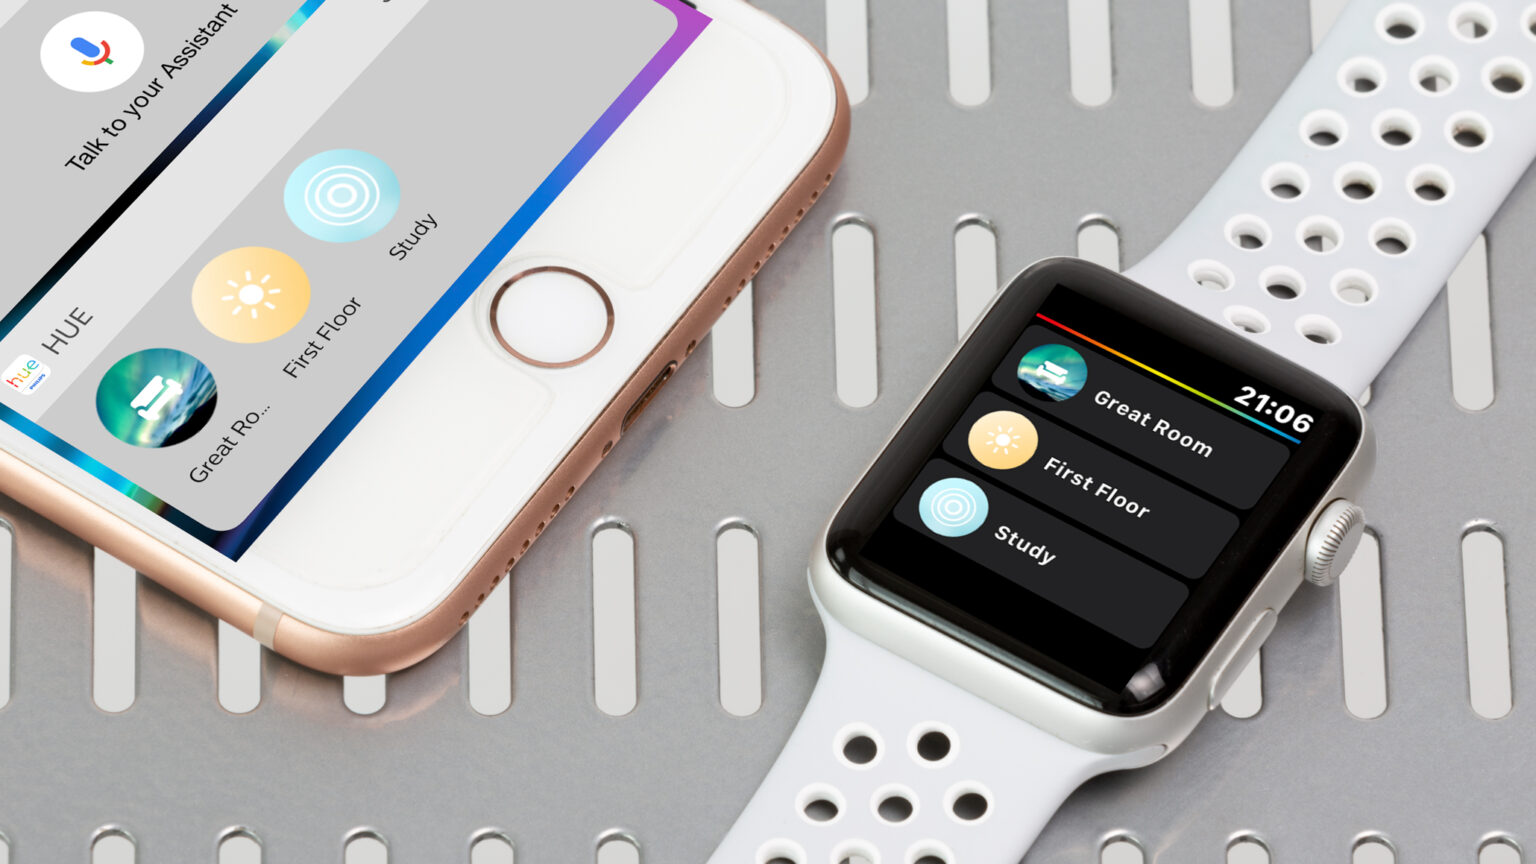 Featuring integration with Apple iOS as well as watchOS, the Philips Hue app for Apple Watch enables Hue lighting control via widgets. Image: Digitized House Media.